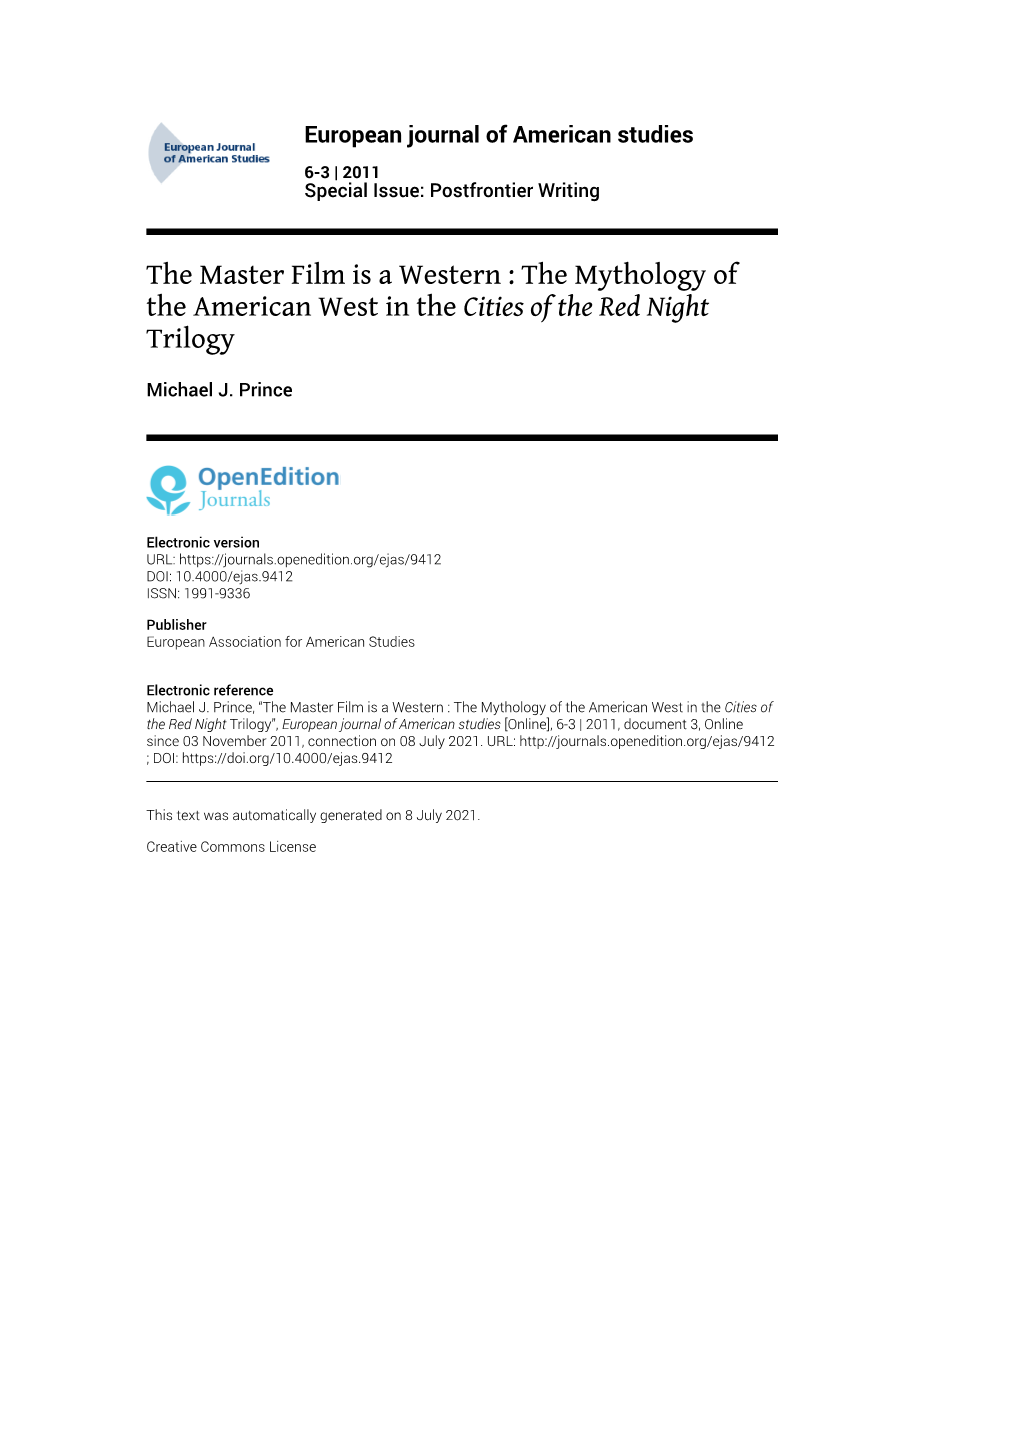 European Journal of American Studies, 6-3 | 2011 the Master Film Is a Western : the Mythology of the American West in the Citi